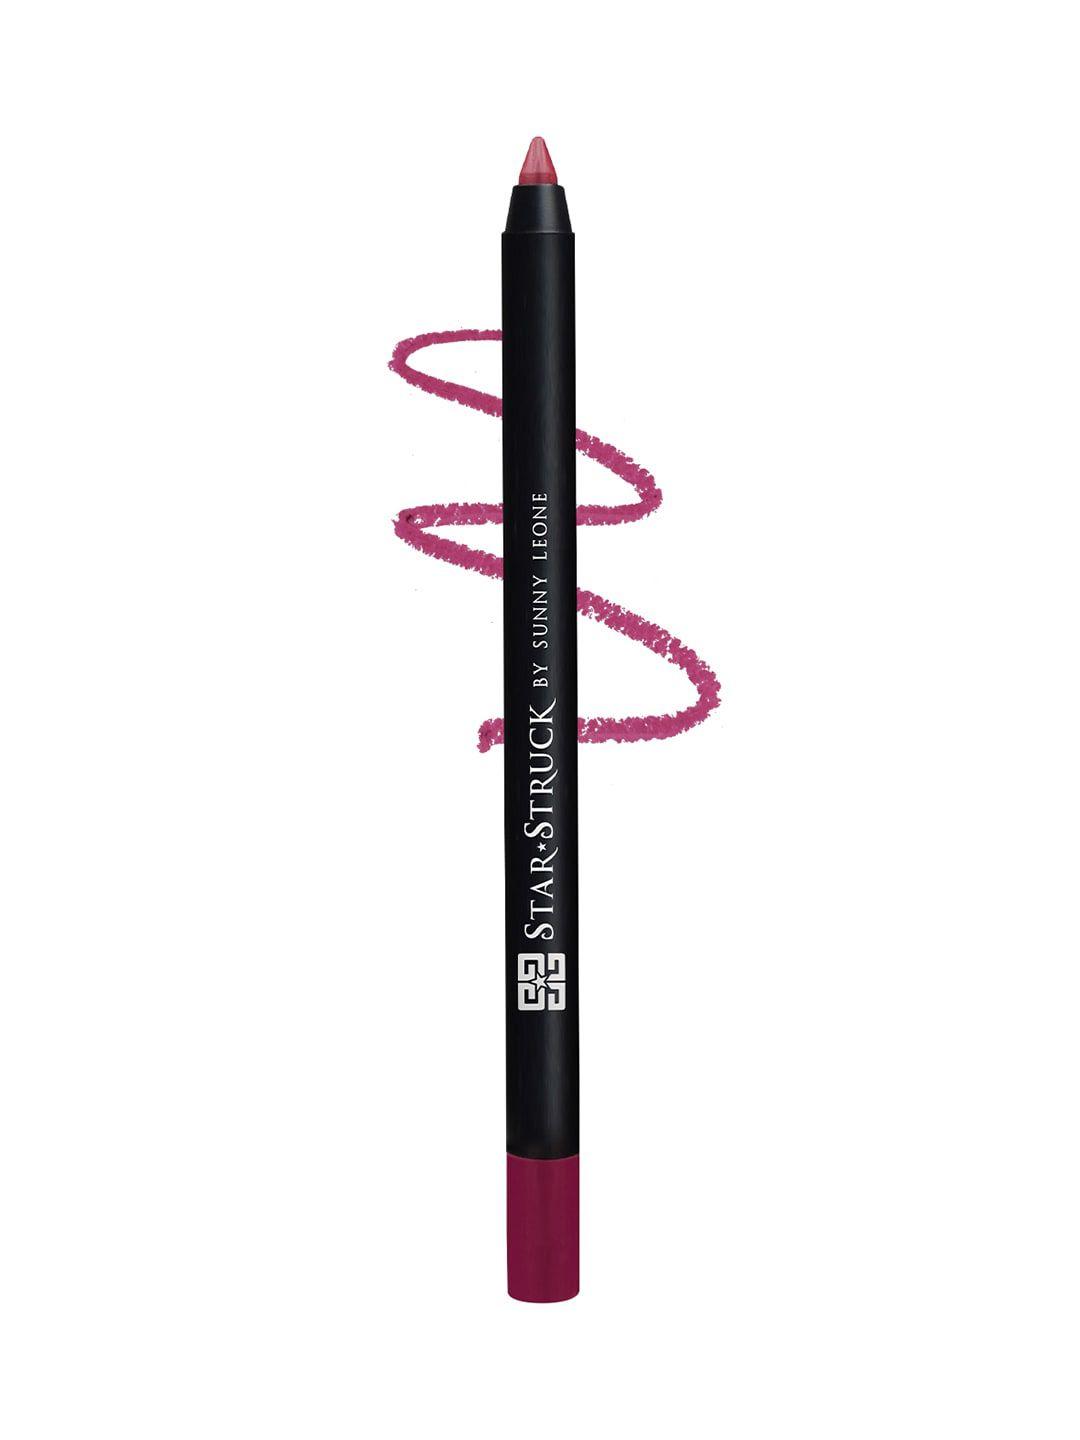 star struck by sunny leone make your lips pop water resistant long wear lip liner - rooberry